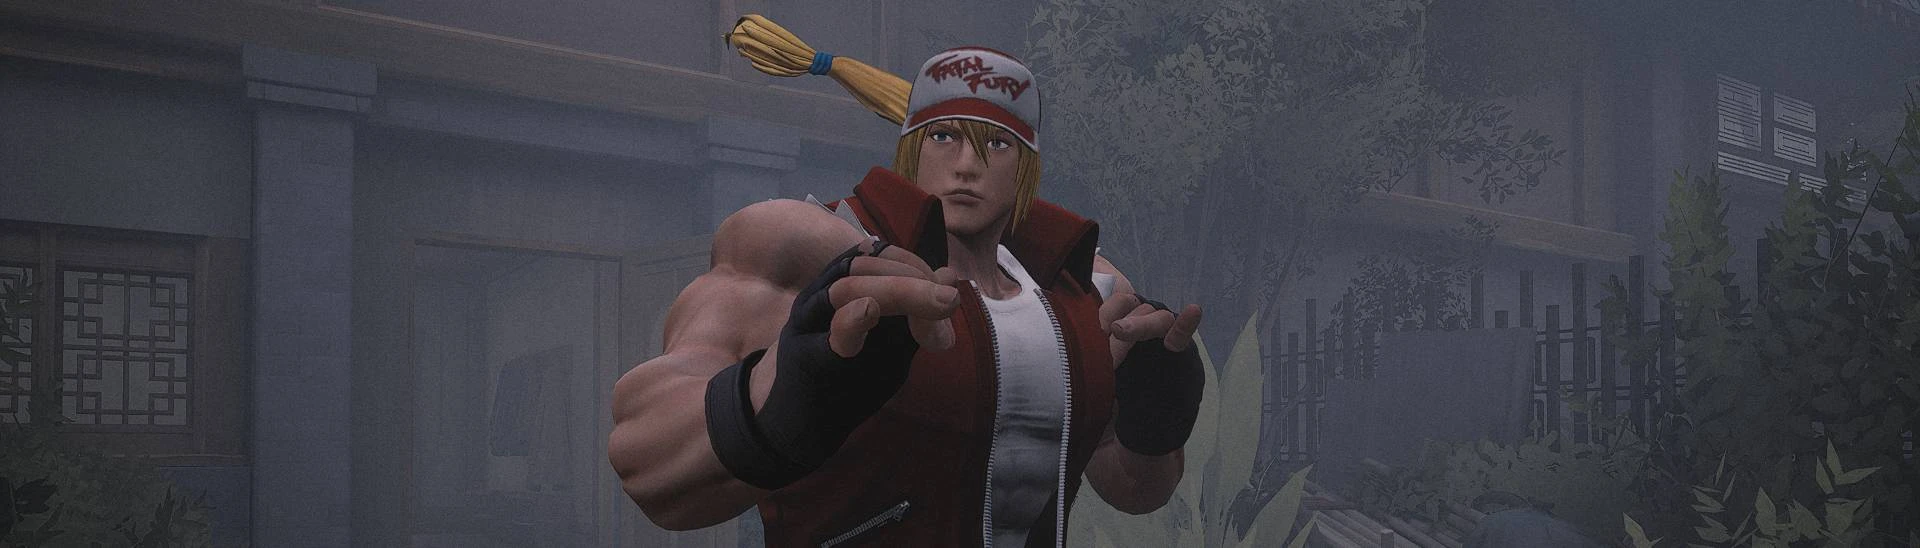 How To Master Team Fatal Fury In KOFXV